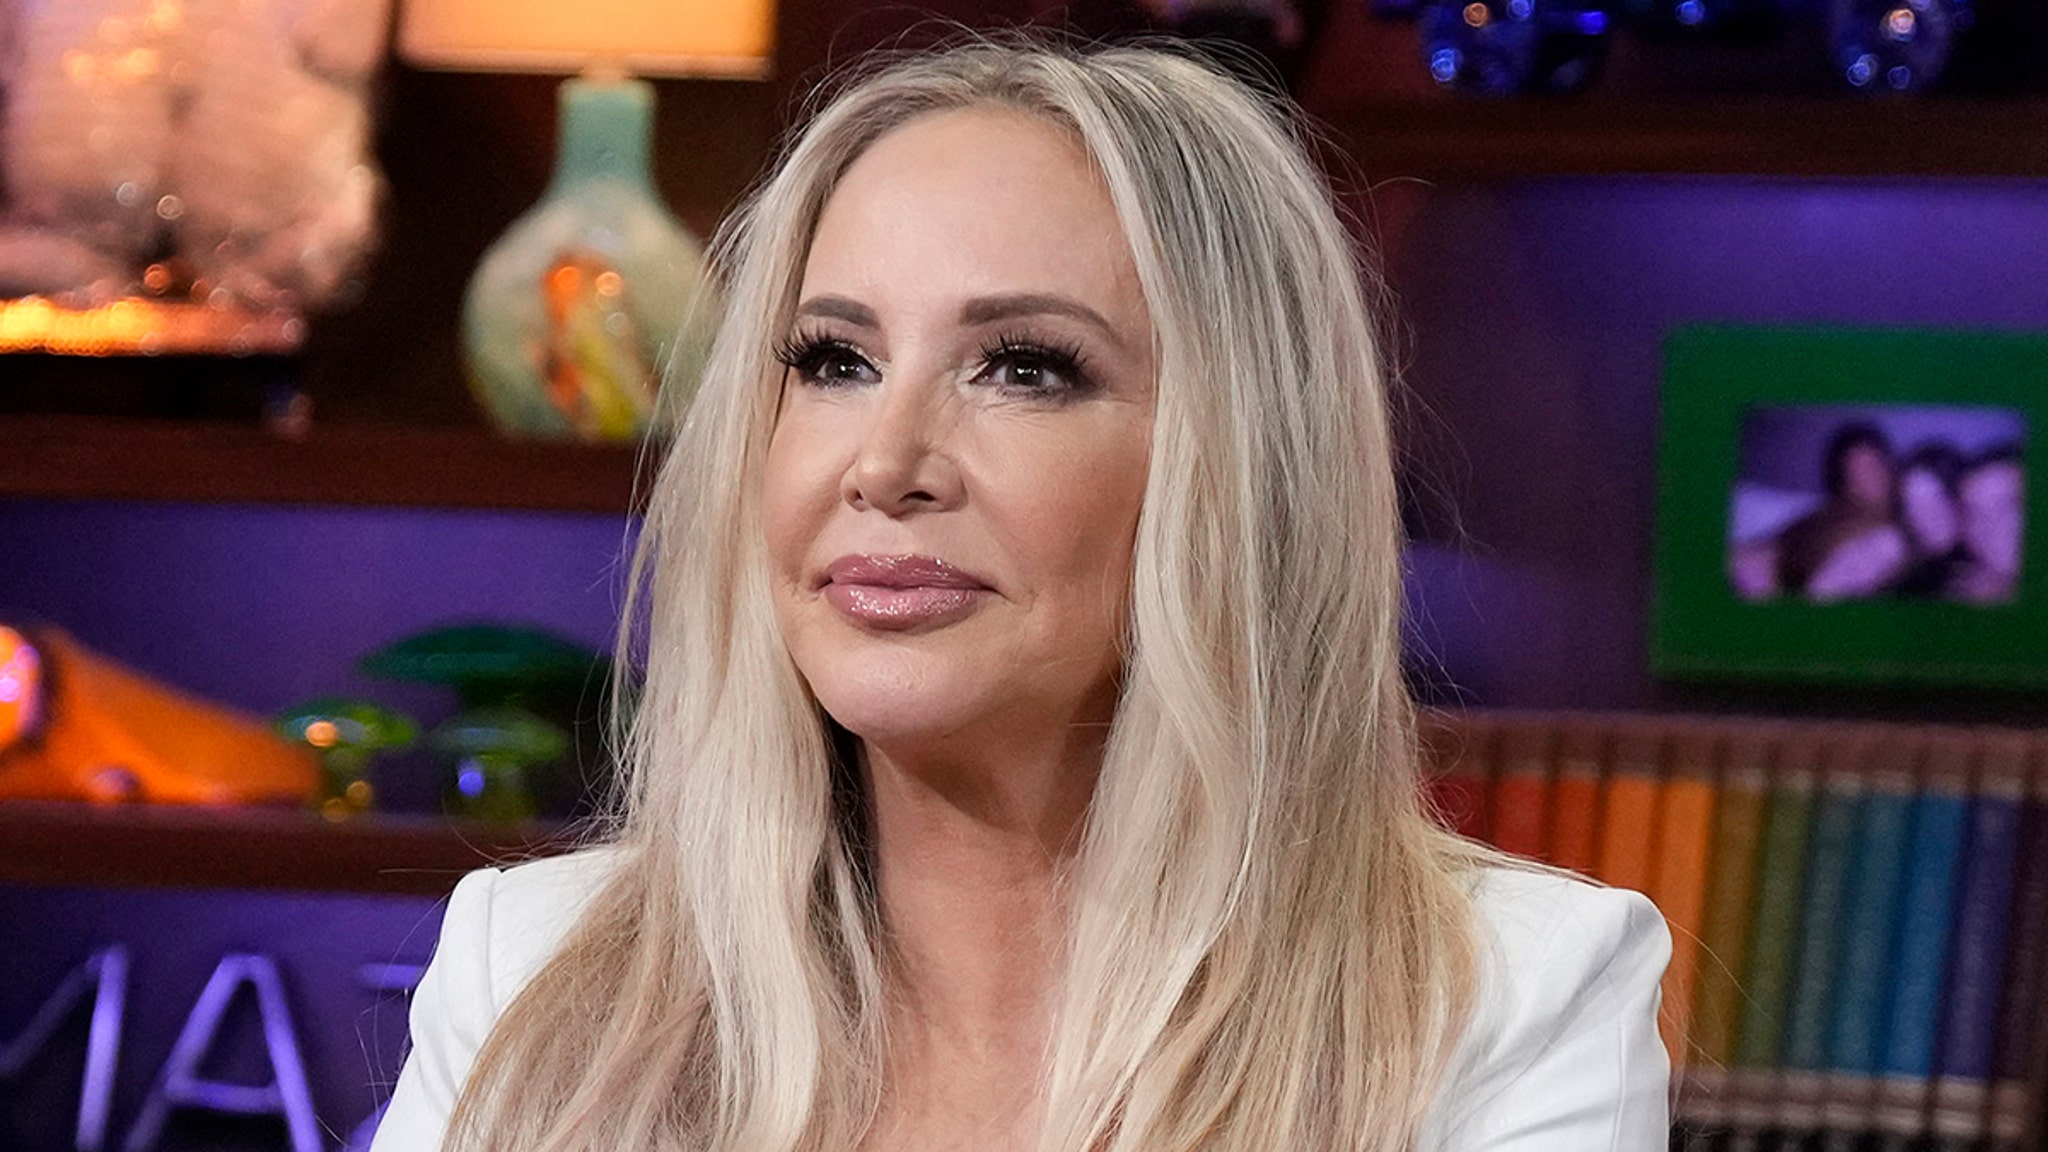 ‘RHOC’ Star Shannon Beador Arrested For DUI Alcohol and Hit-and-Run